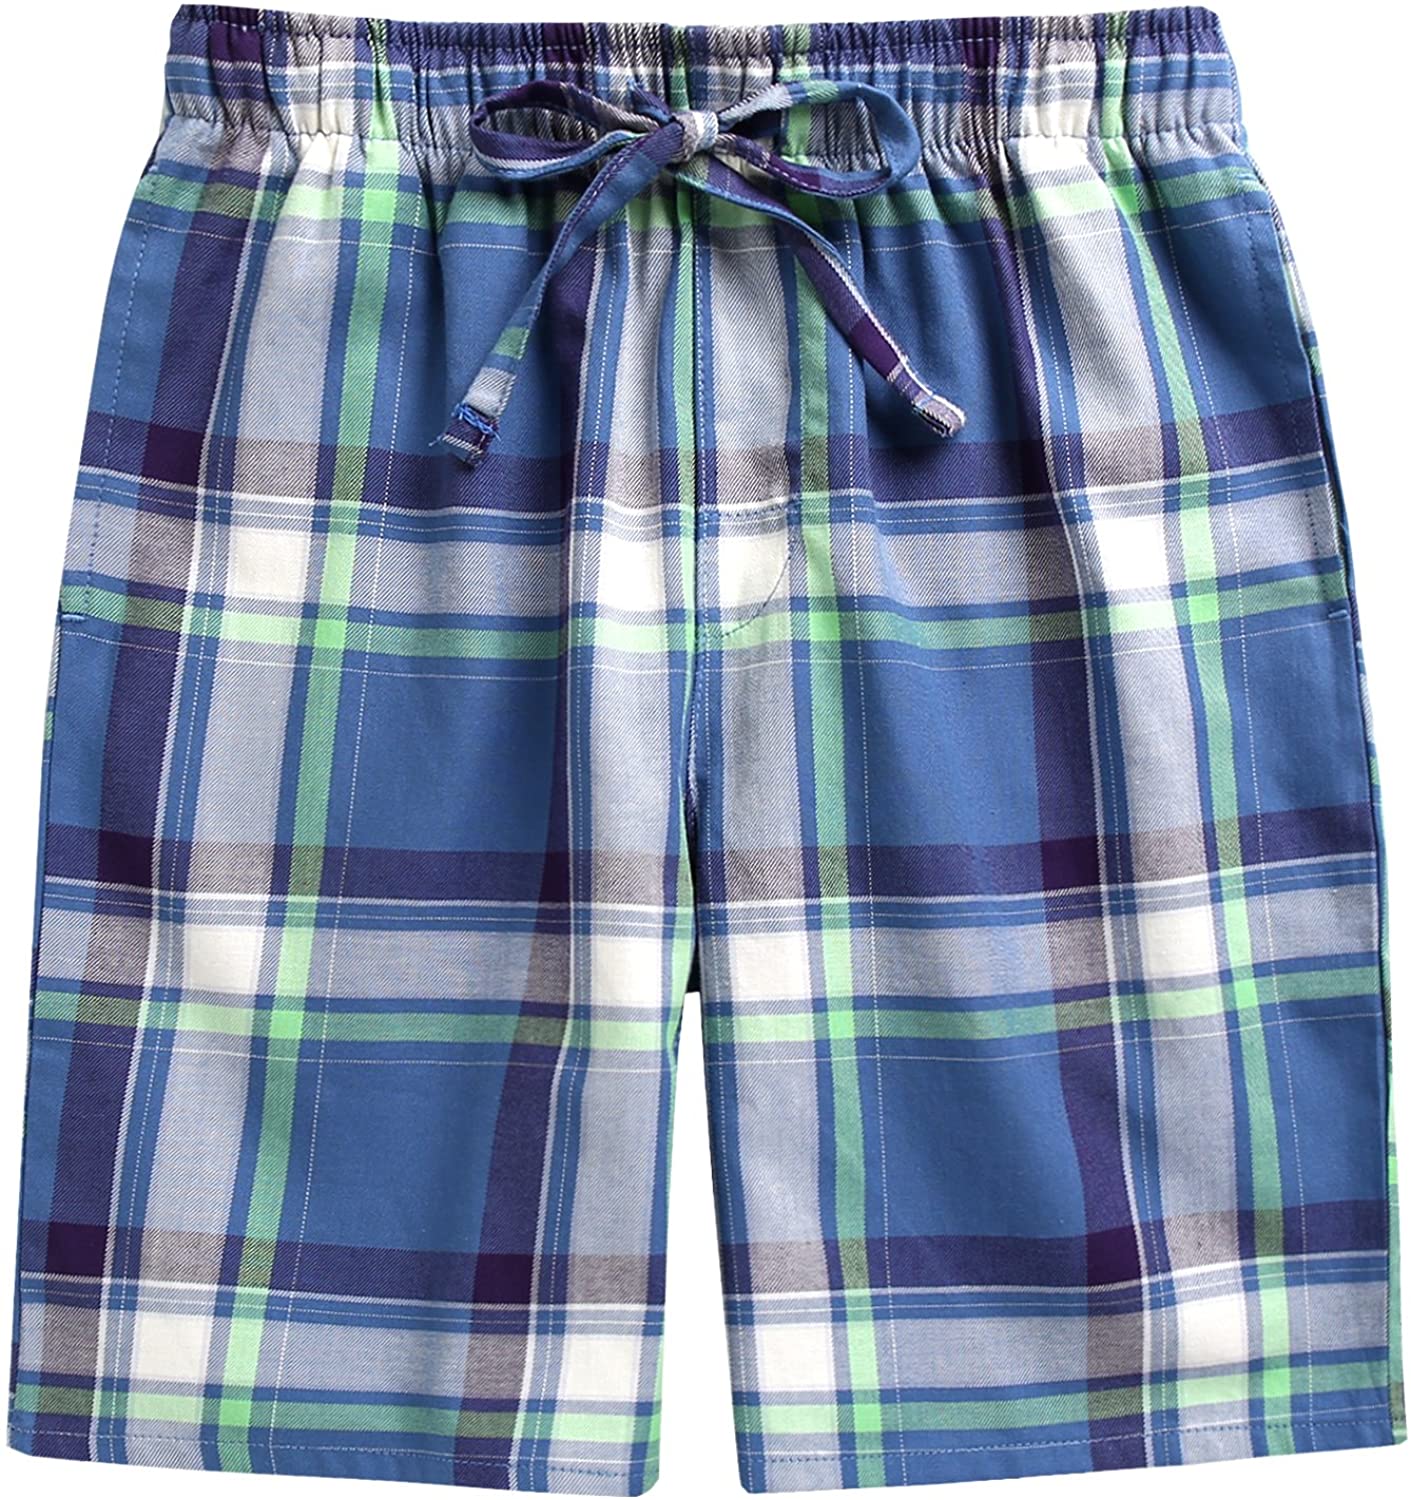 100% Woven Soft Plaid Check Lounger Sleeping Pajama Pants with Pockets TINFL Cotton Long Short Lounge Pants for Men 